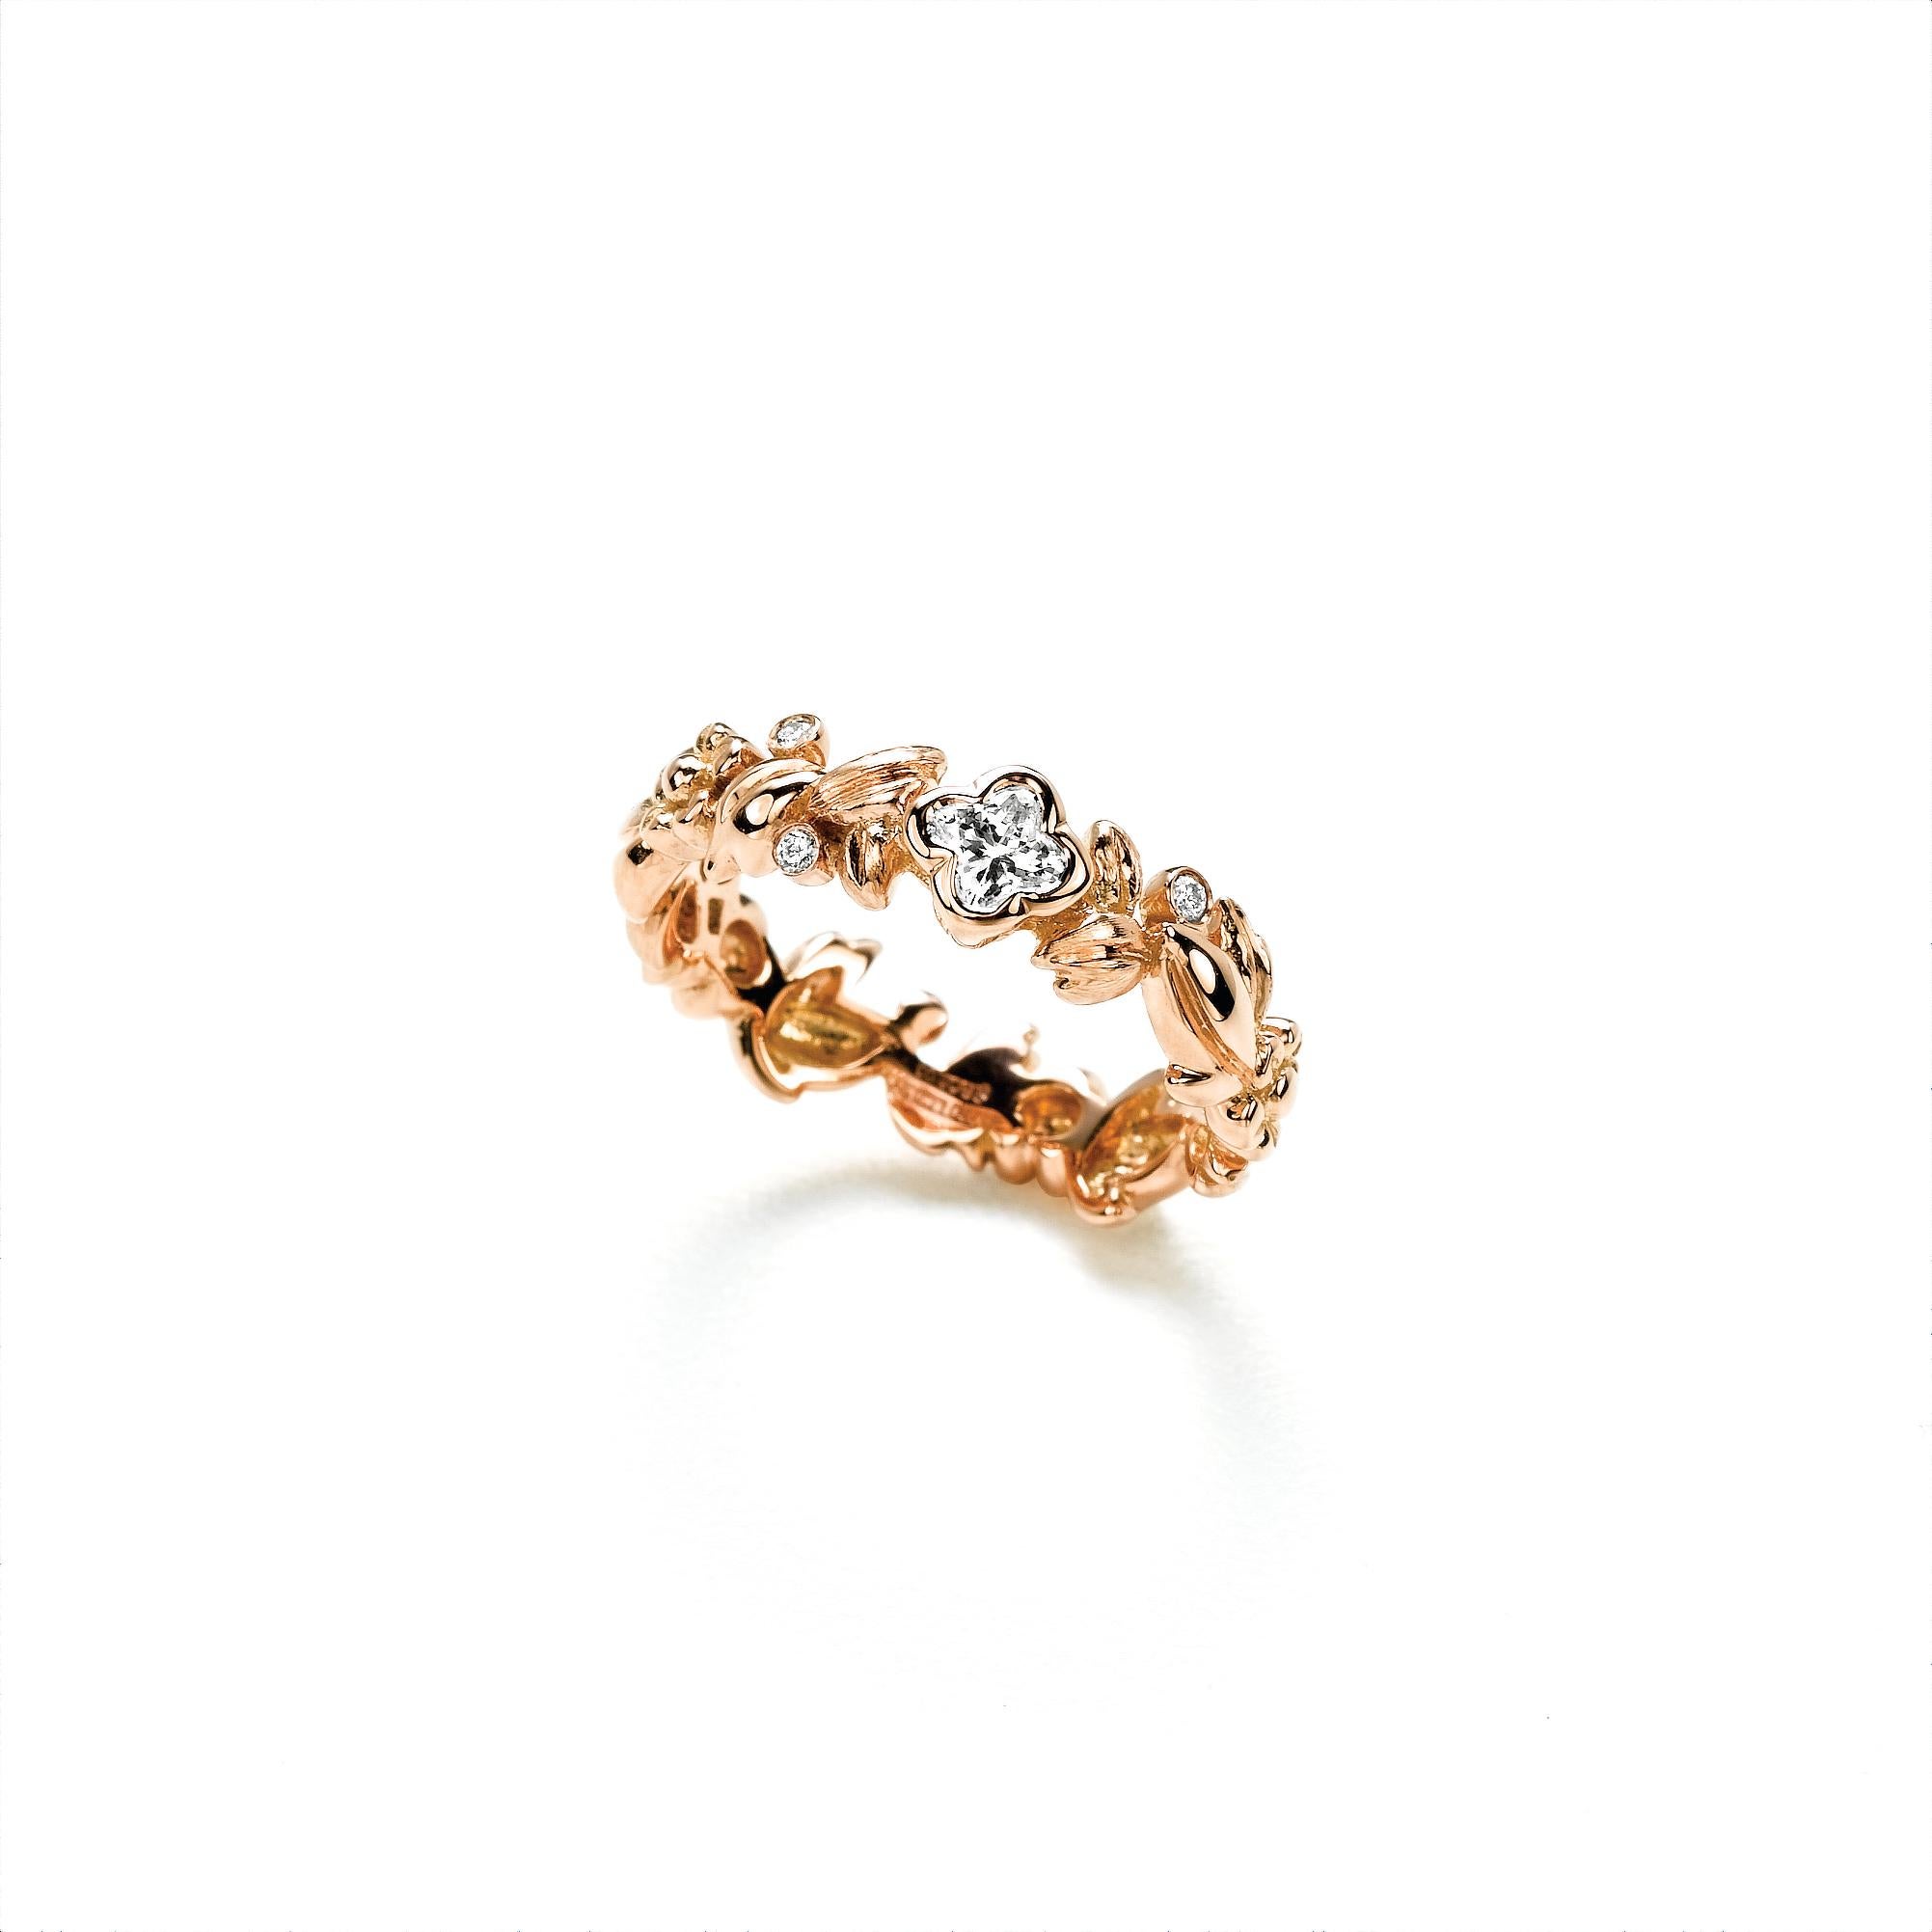 18 Karat Rose Gold  Diamond Flower leaf ring 0.28 Carat Total . .1 LILY CUT ® flower shape diamond H color VS SI clarity  0.25cts . Additional 0.03ct round diamond accent . Available in  Finger sizes 5,6,7 .
